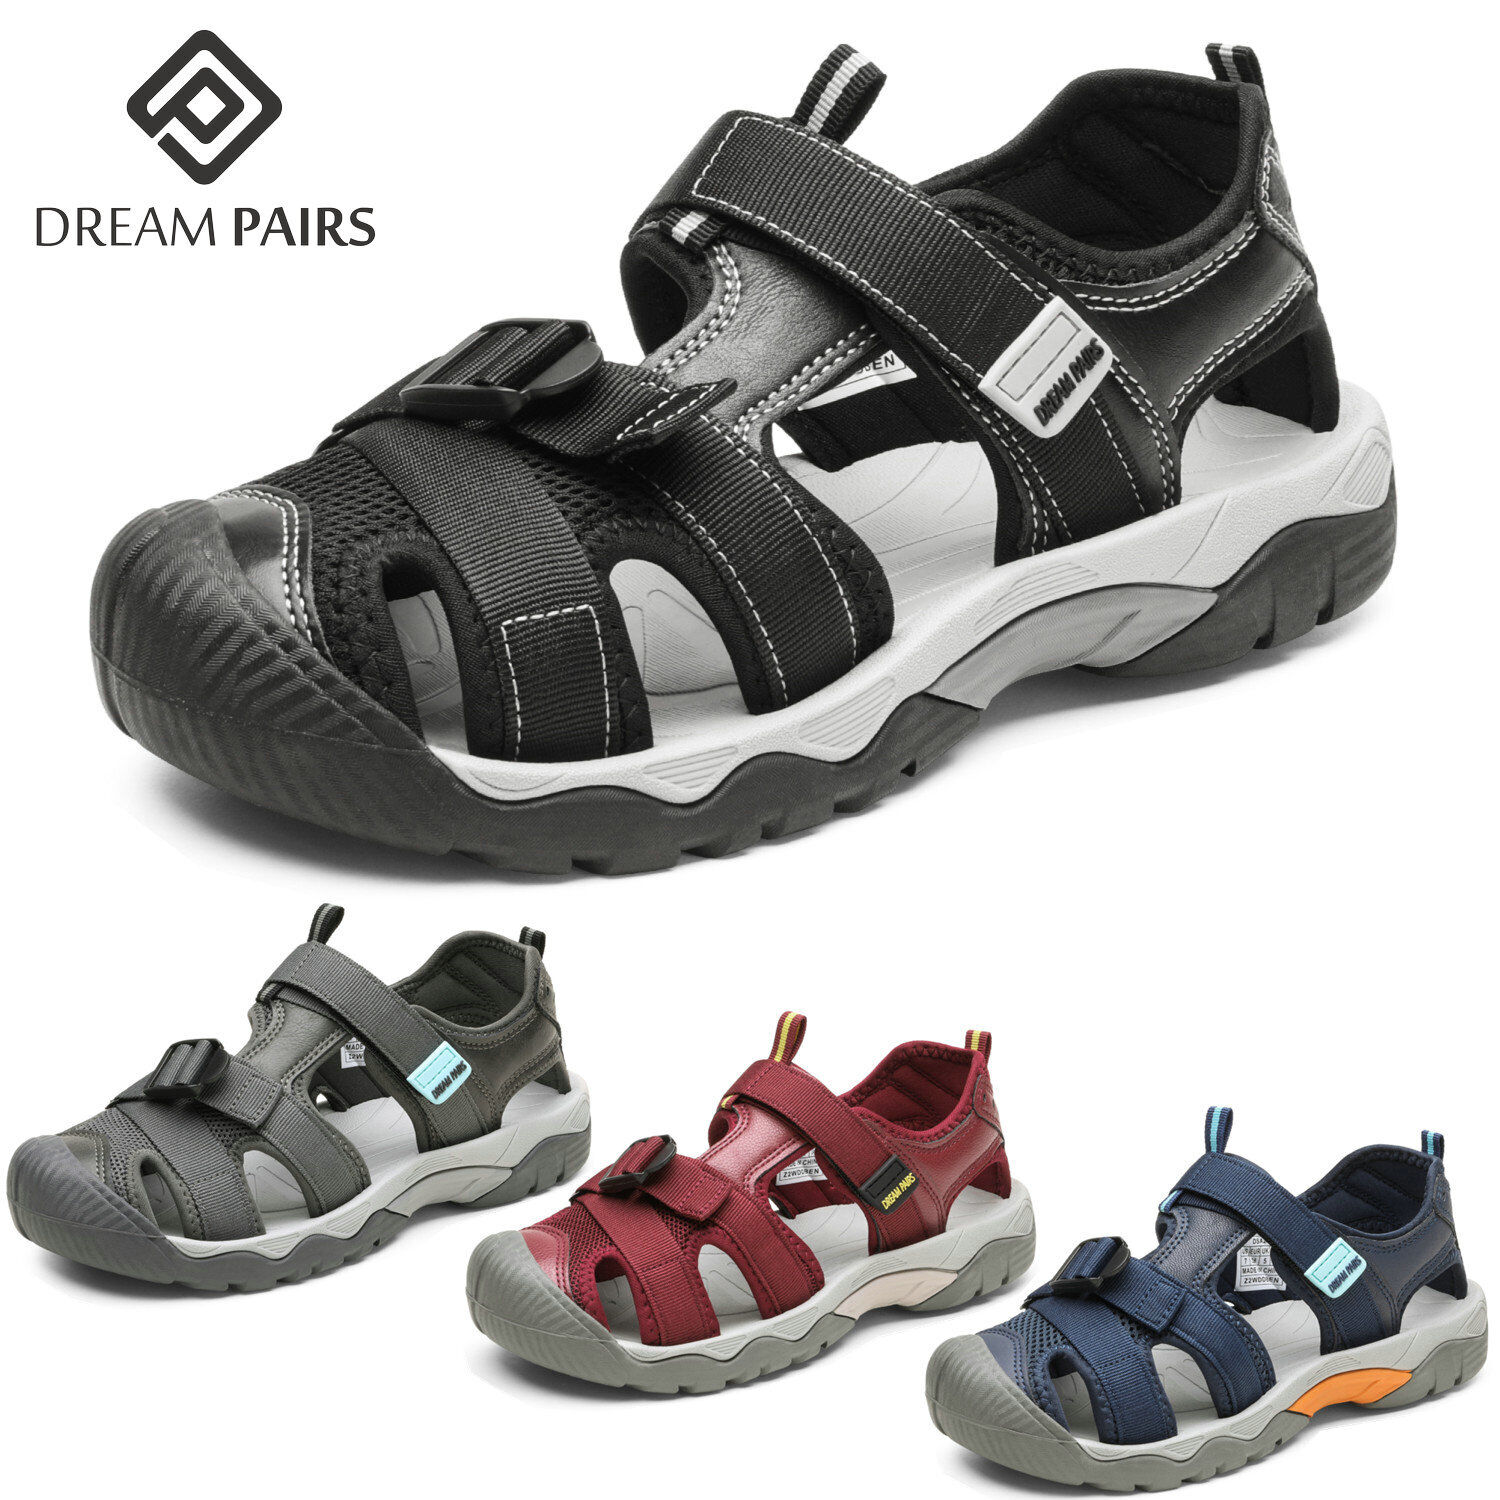 Dream Pairs Womens Sports Sandals Outdoor Hiking Tramp Beach Athletic Sandals